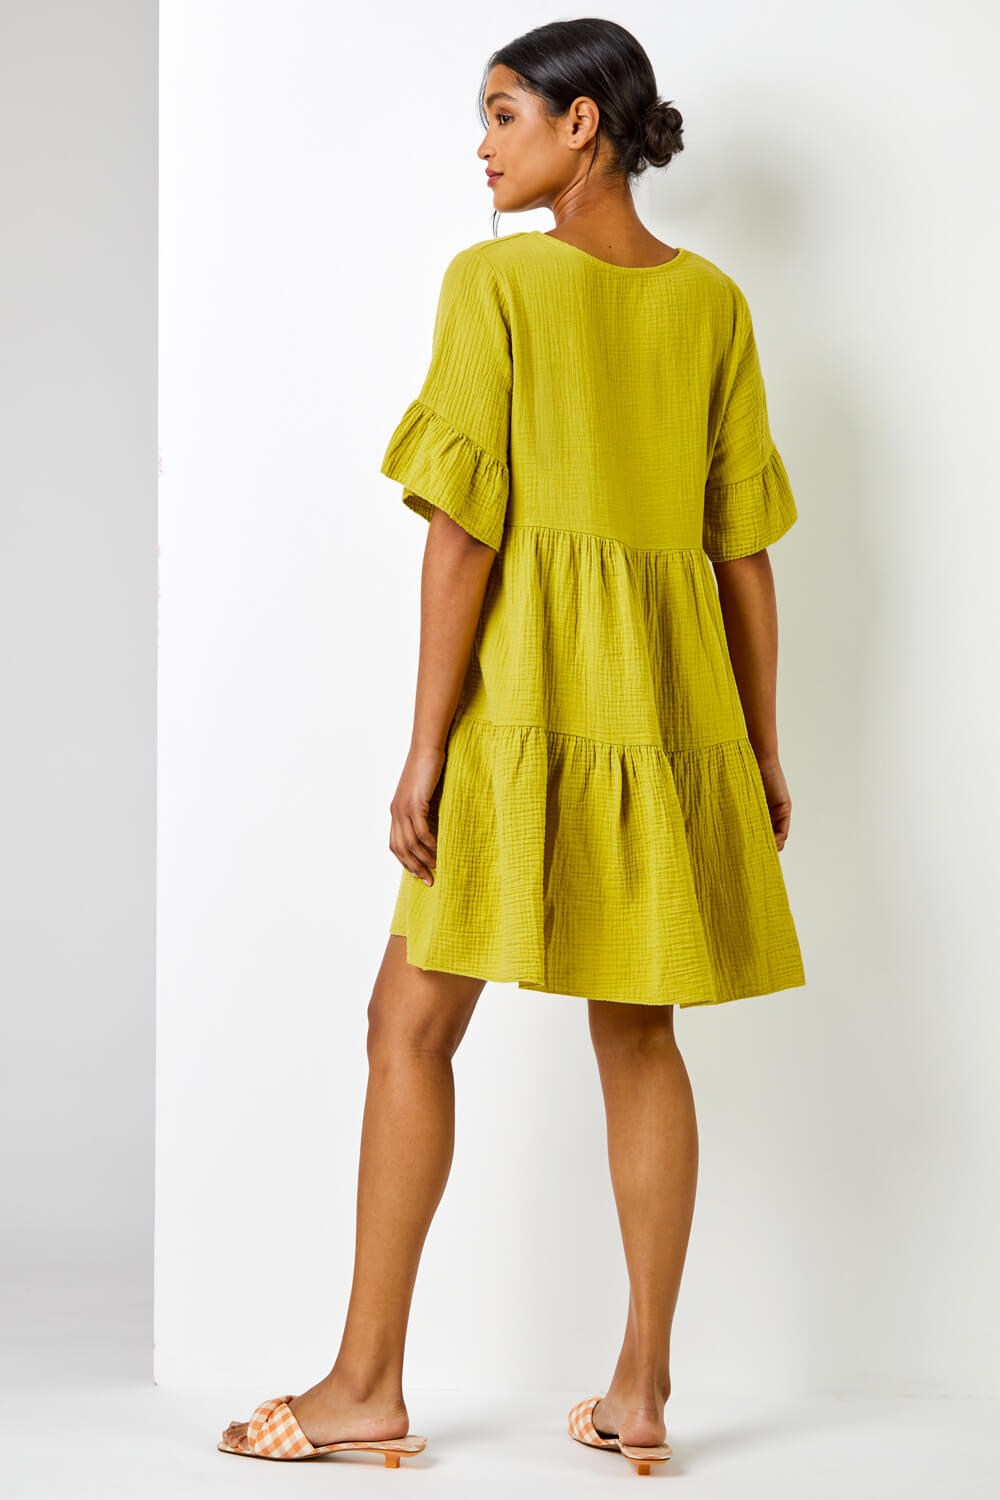 Pea Green Textured Tiered Smock Dress, Image 2 of 5